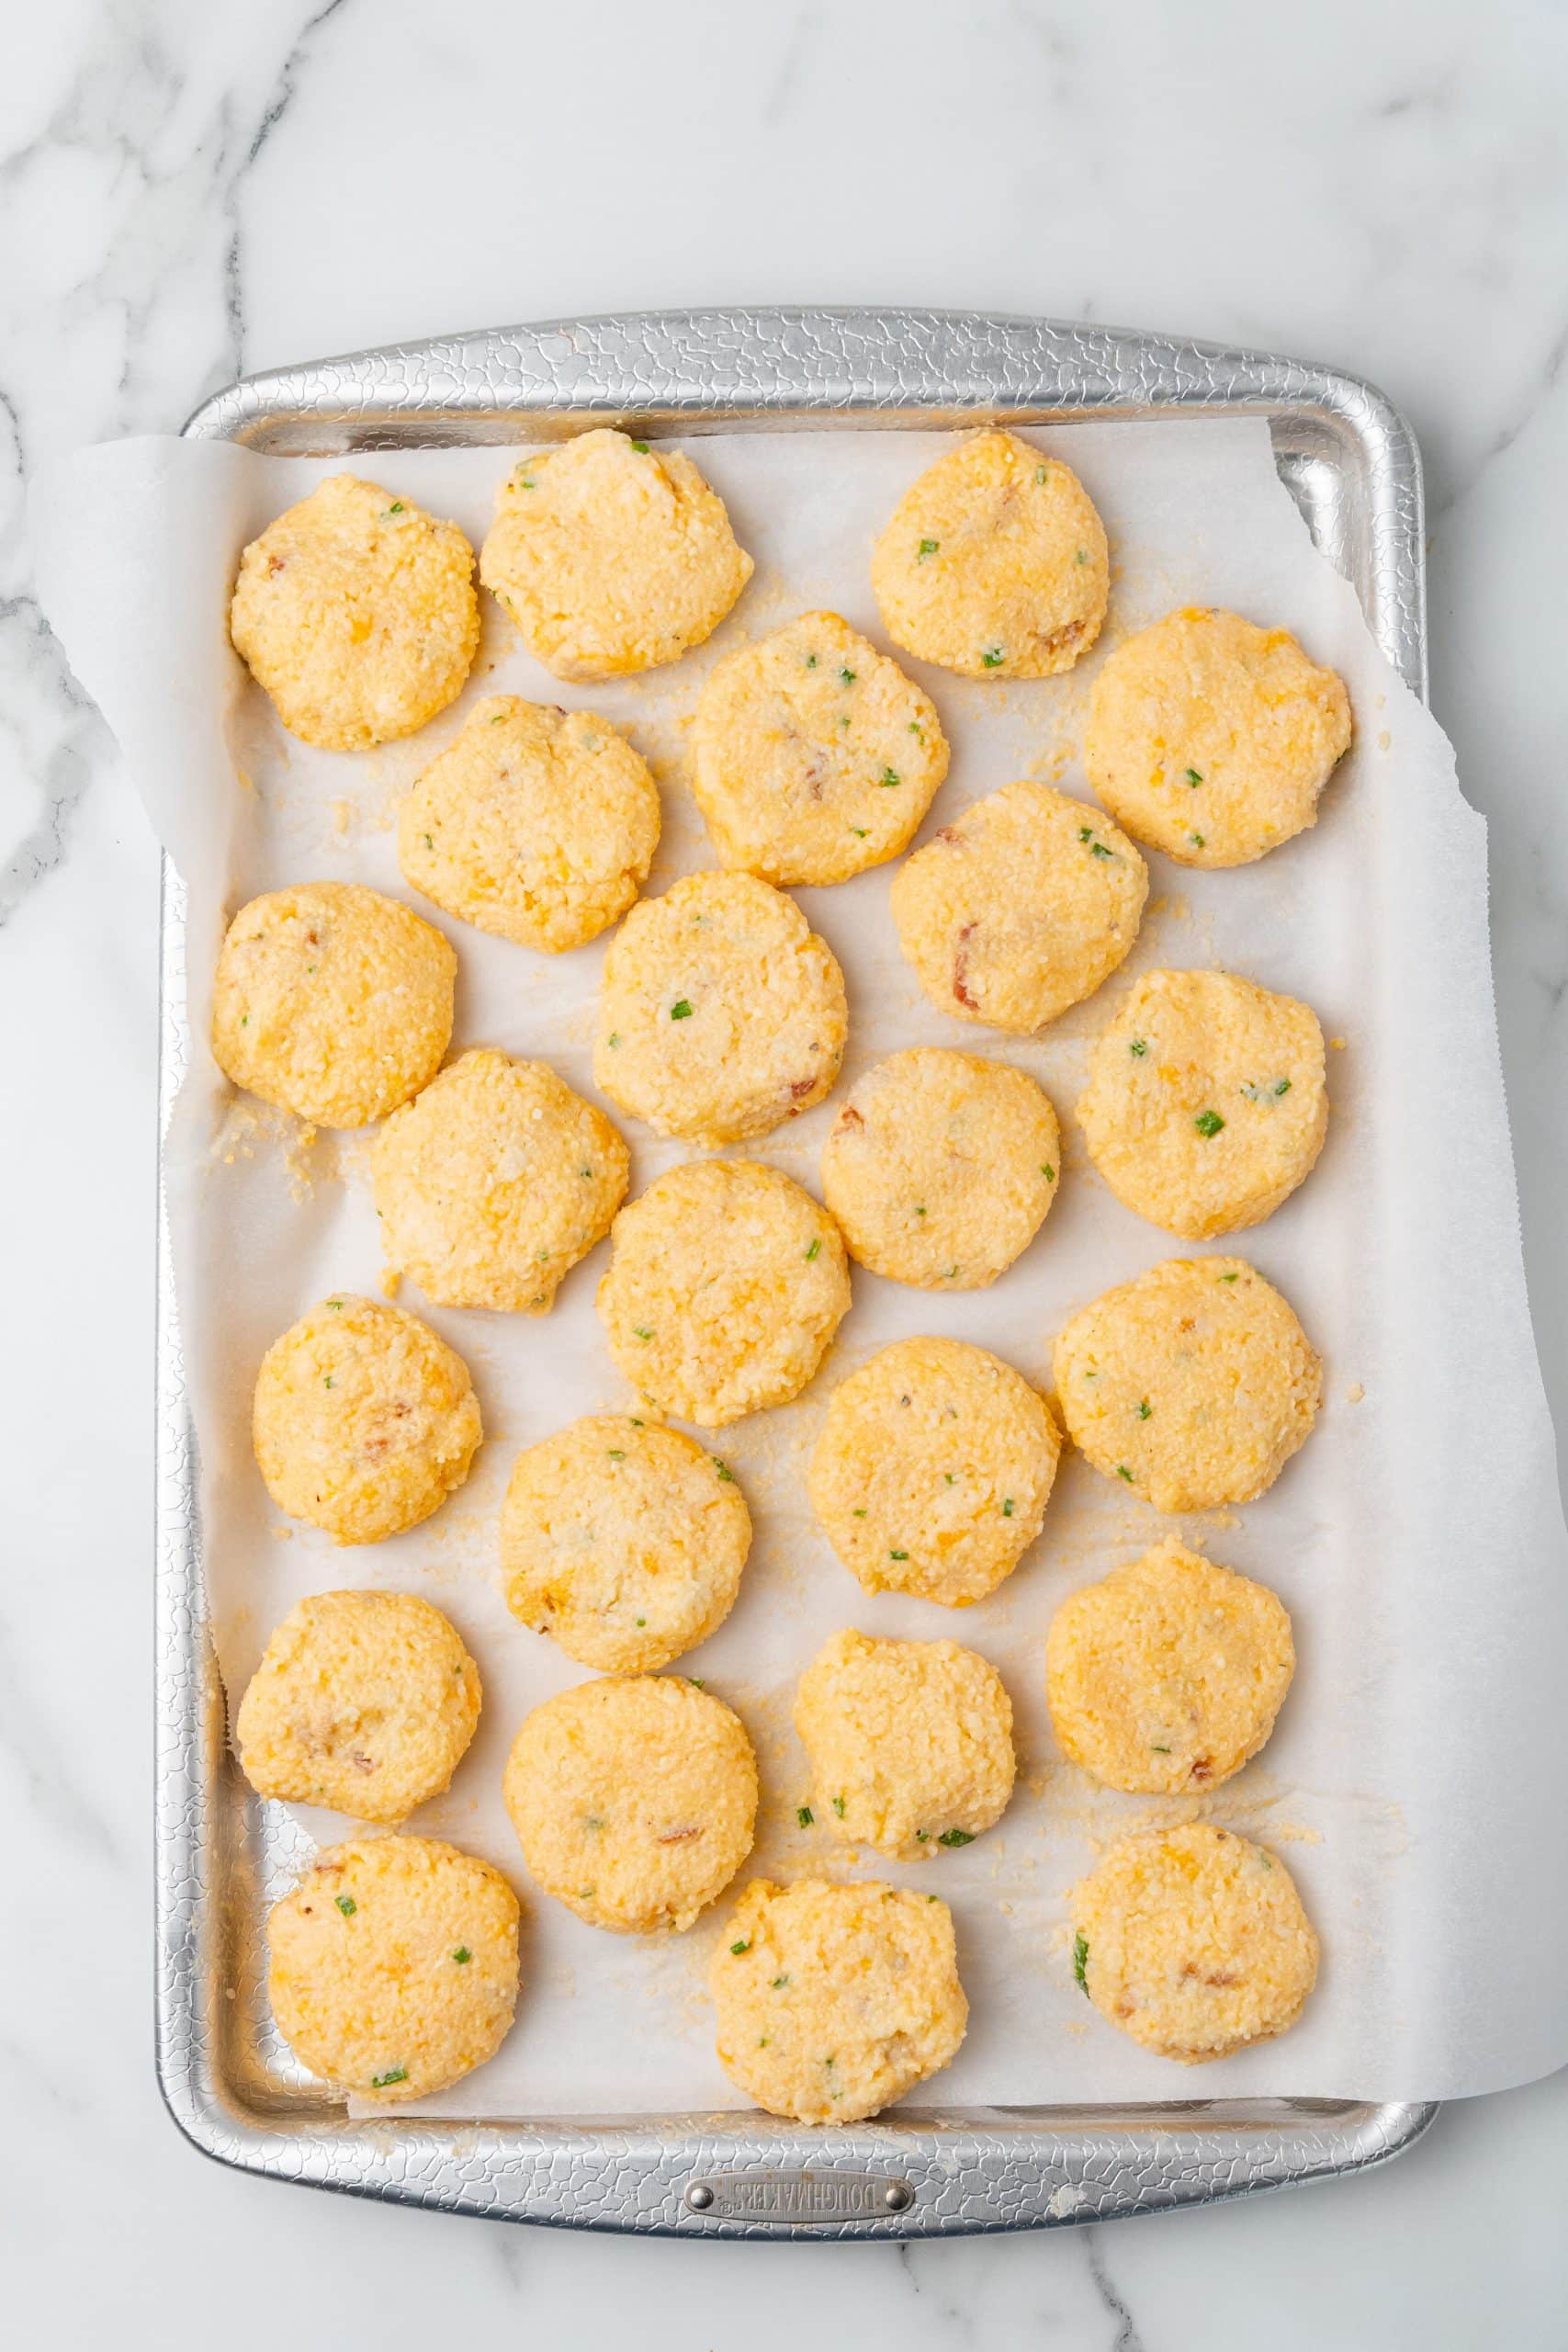 grits patties arranged in rows on a parchment paper lined sheet pan